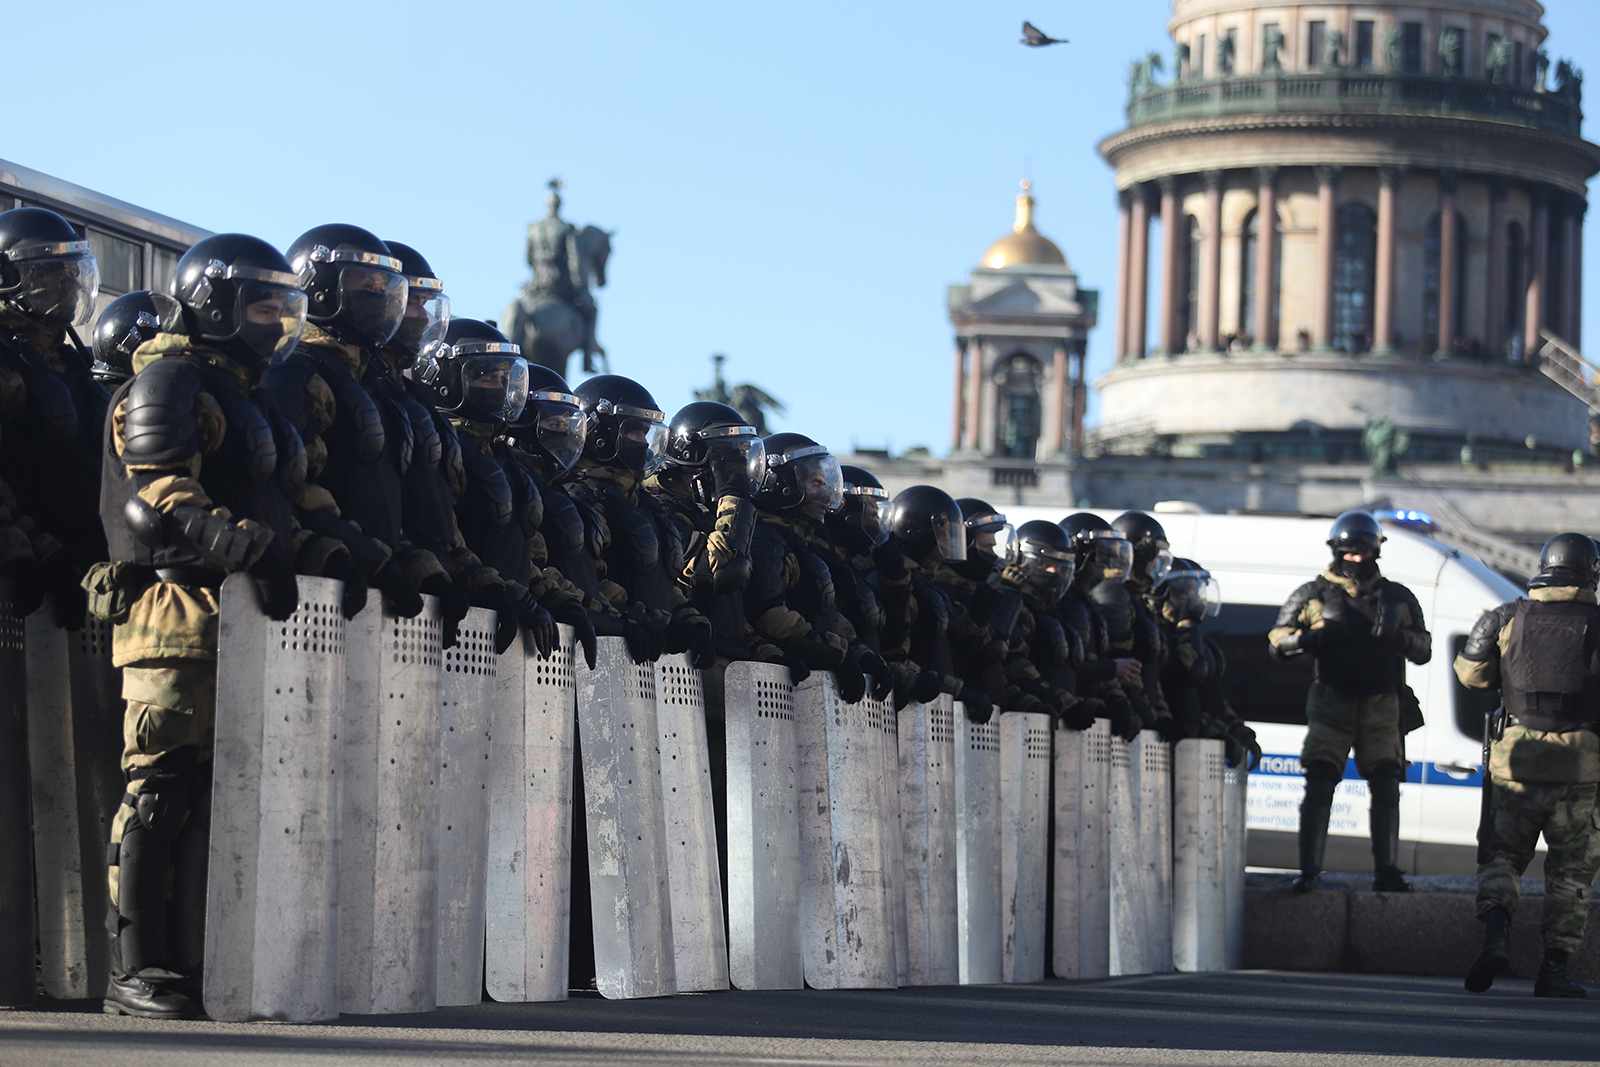 Police brutally beat anti-war protesters in St. Petersburg, Russia